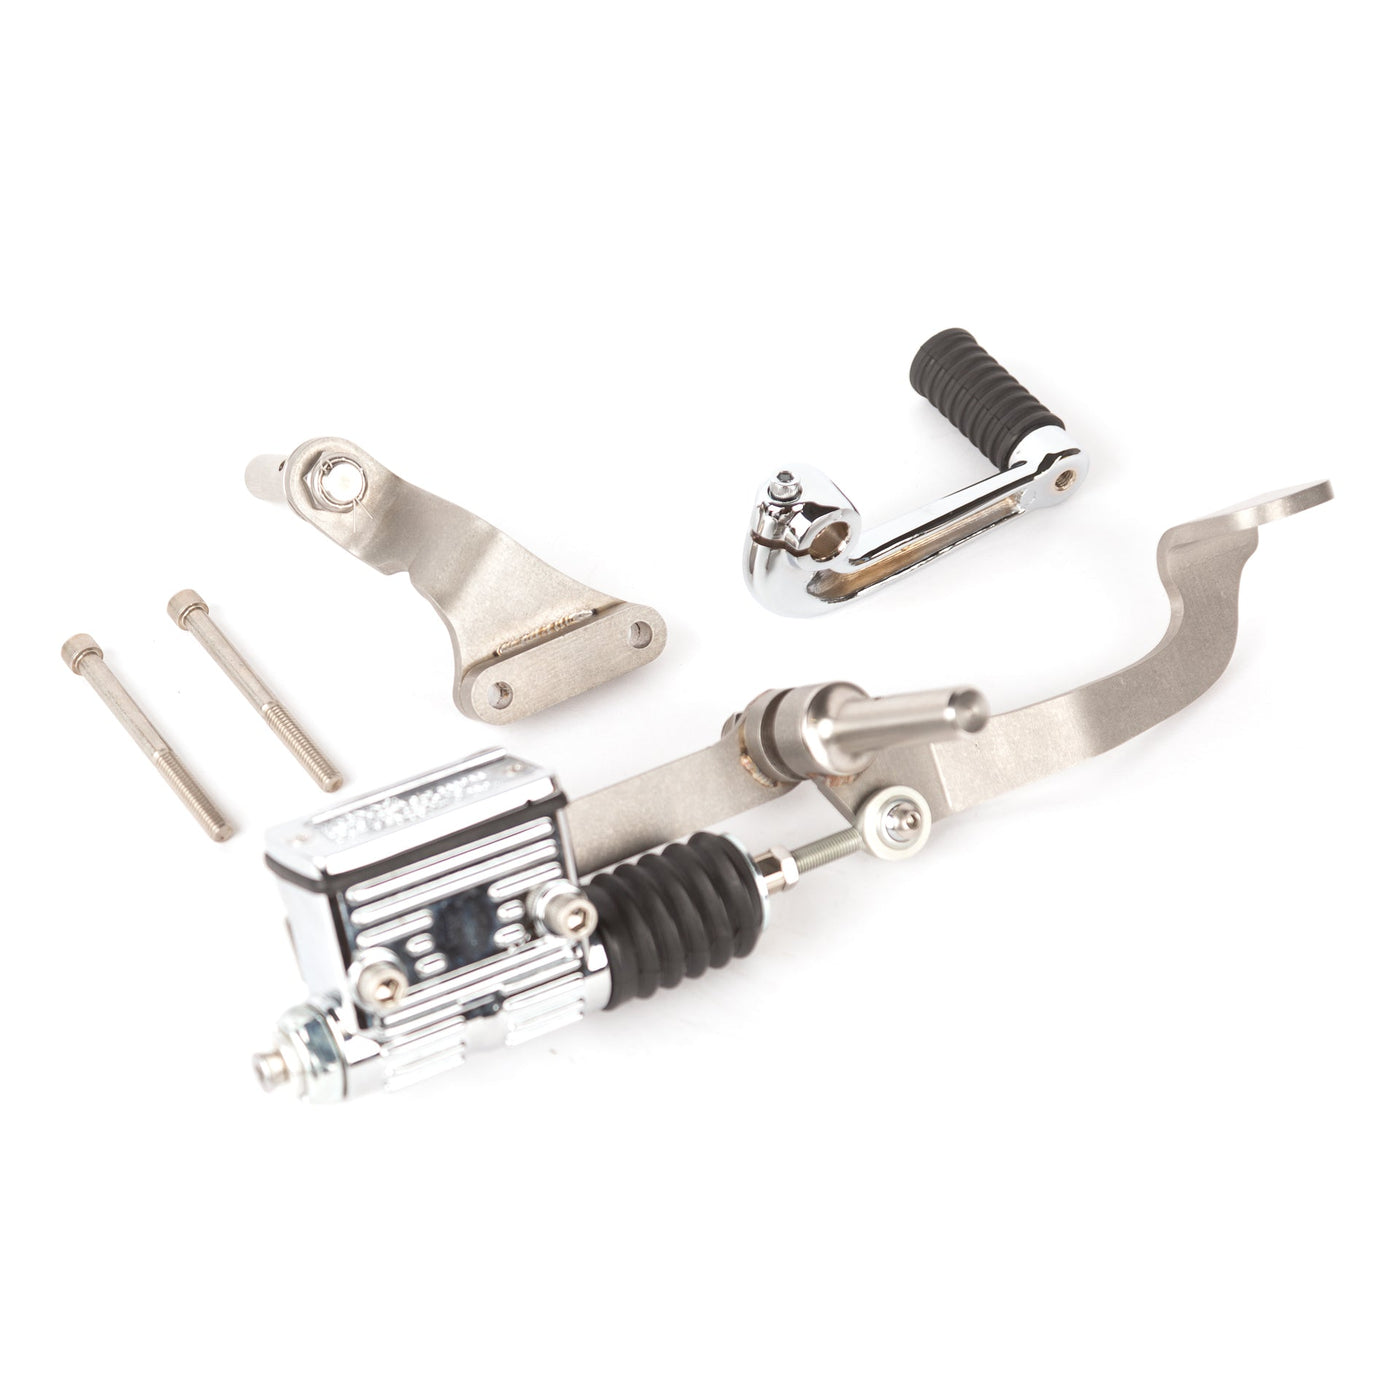 Sportster Mid-Control Kit 1991-2003 - Prism Supply